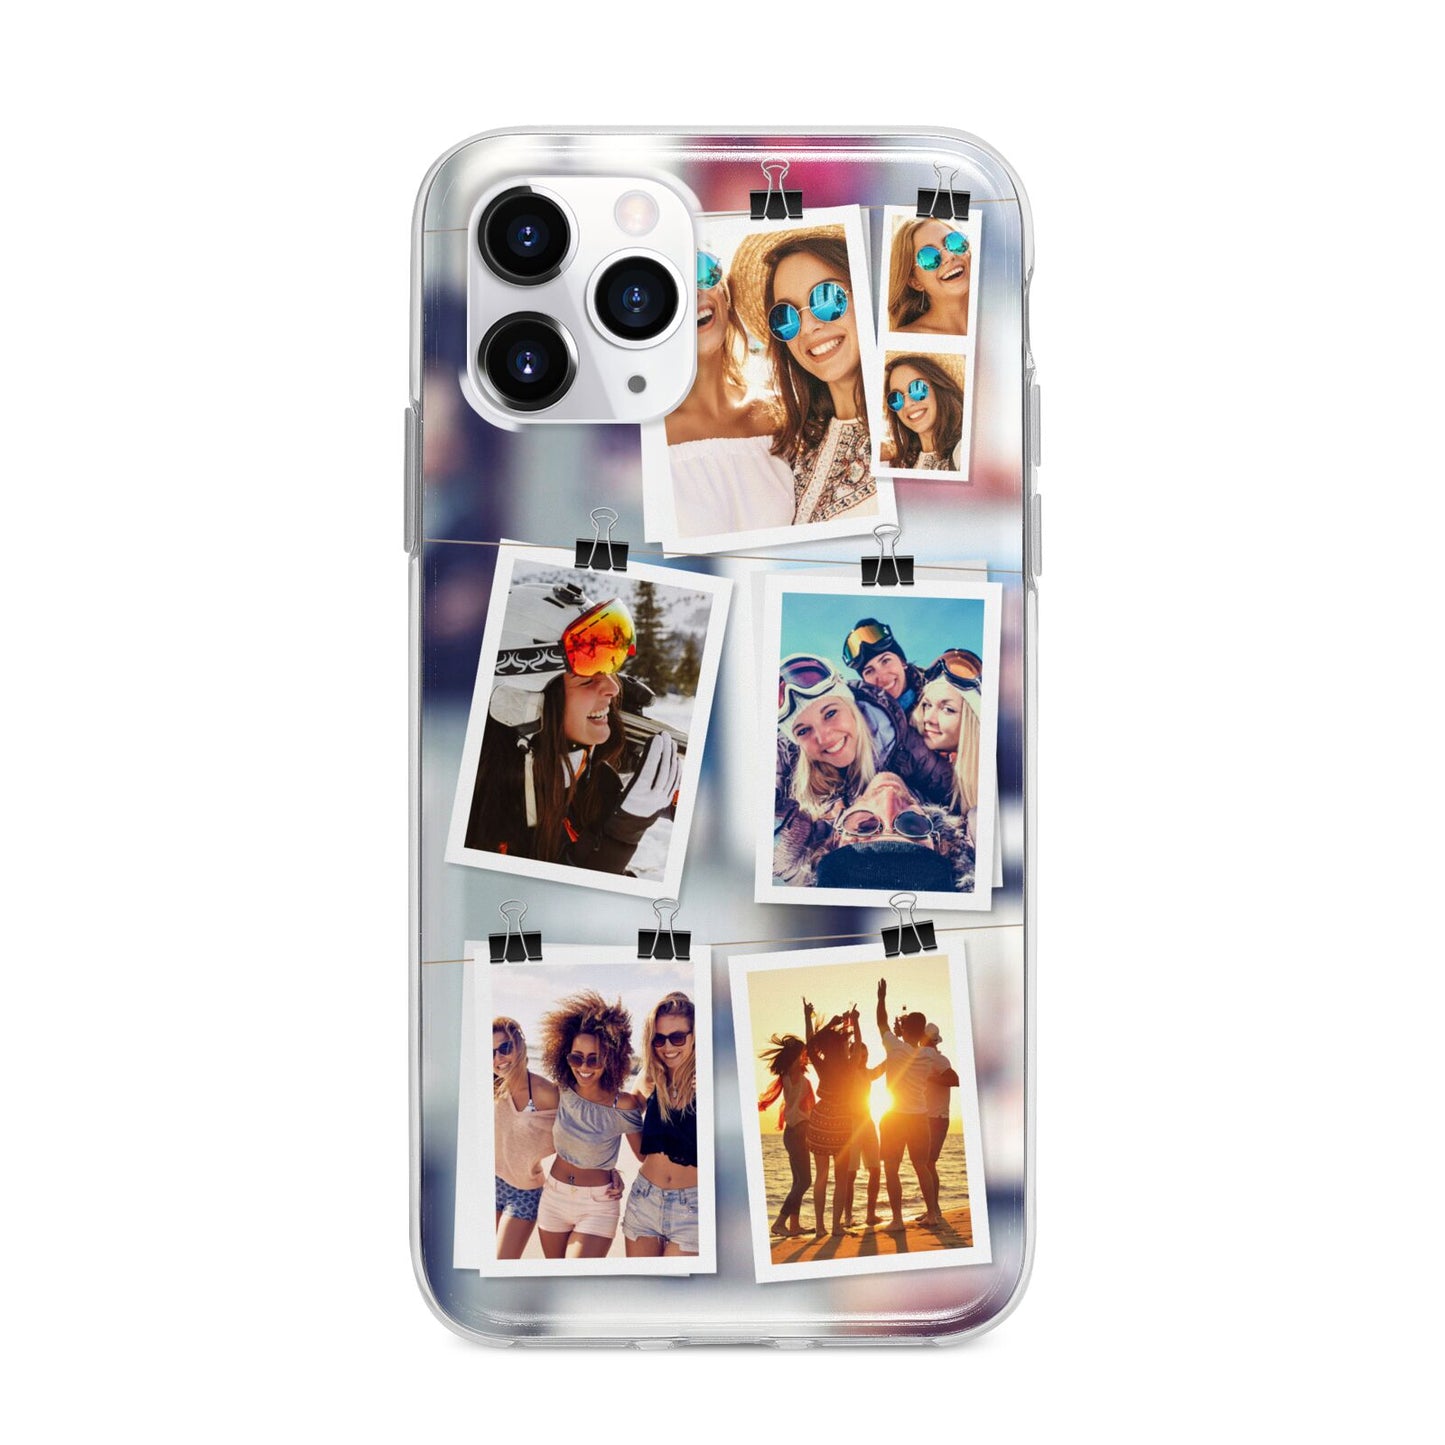 Photo Wall Montage Upload Apple iPhone 11 Pro Max in Silver with Bumper Case